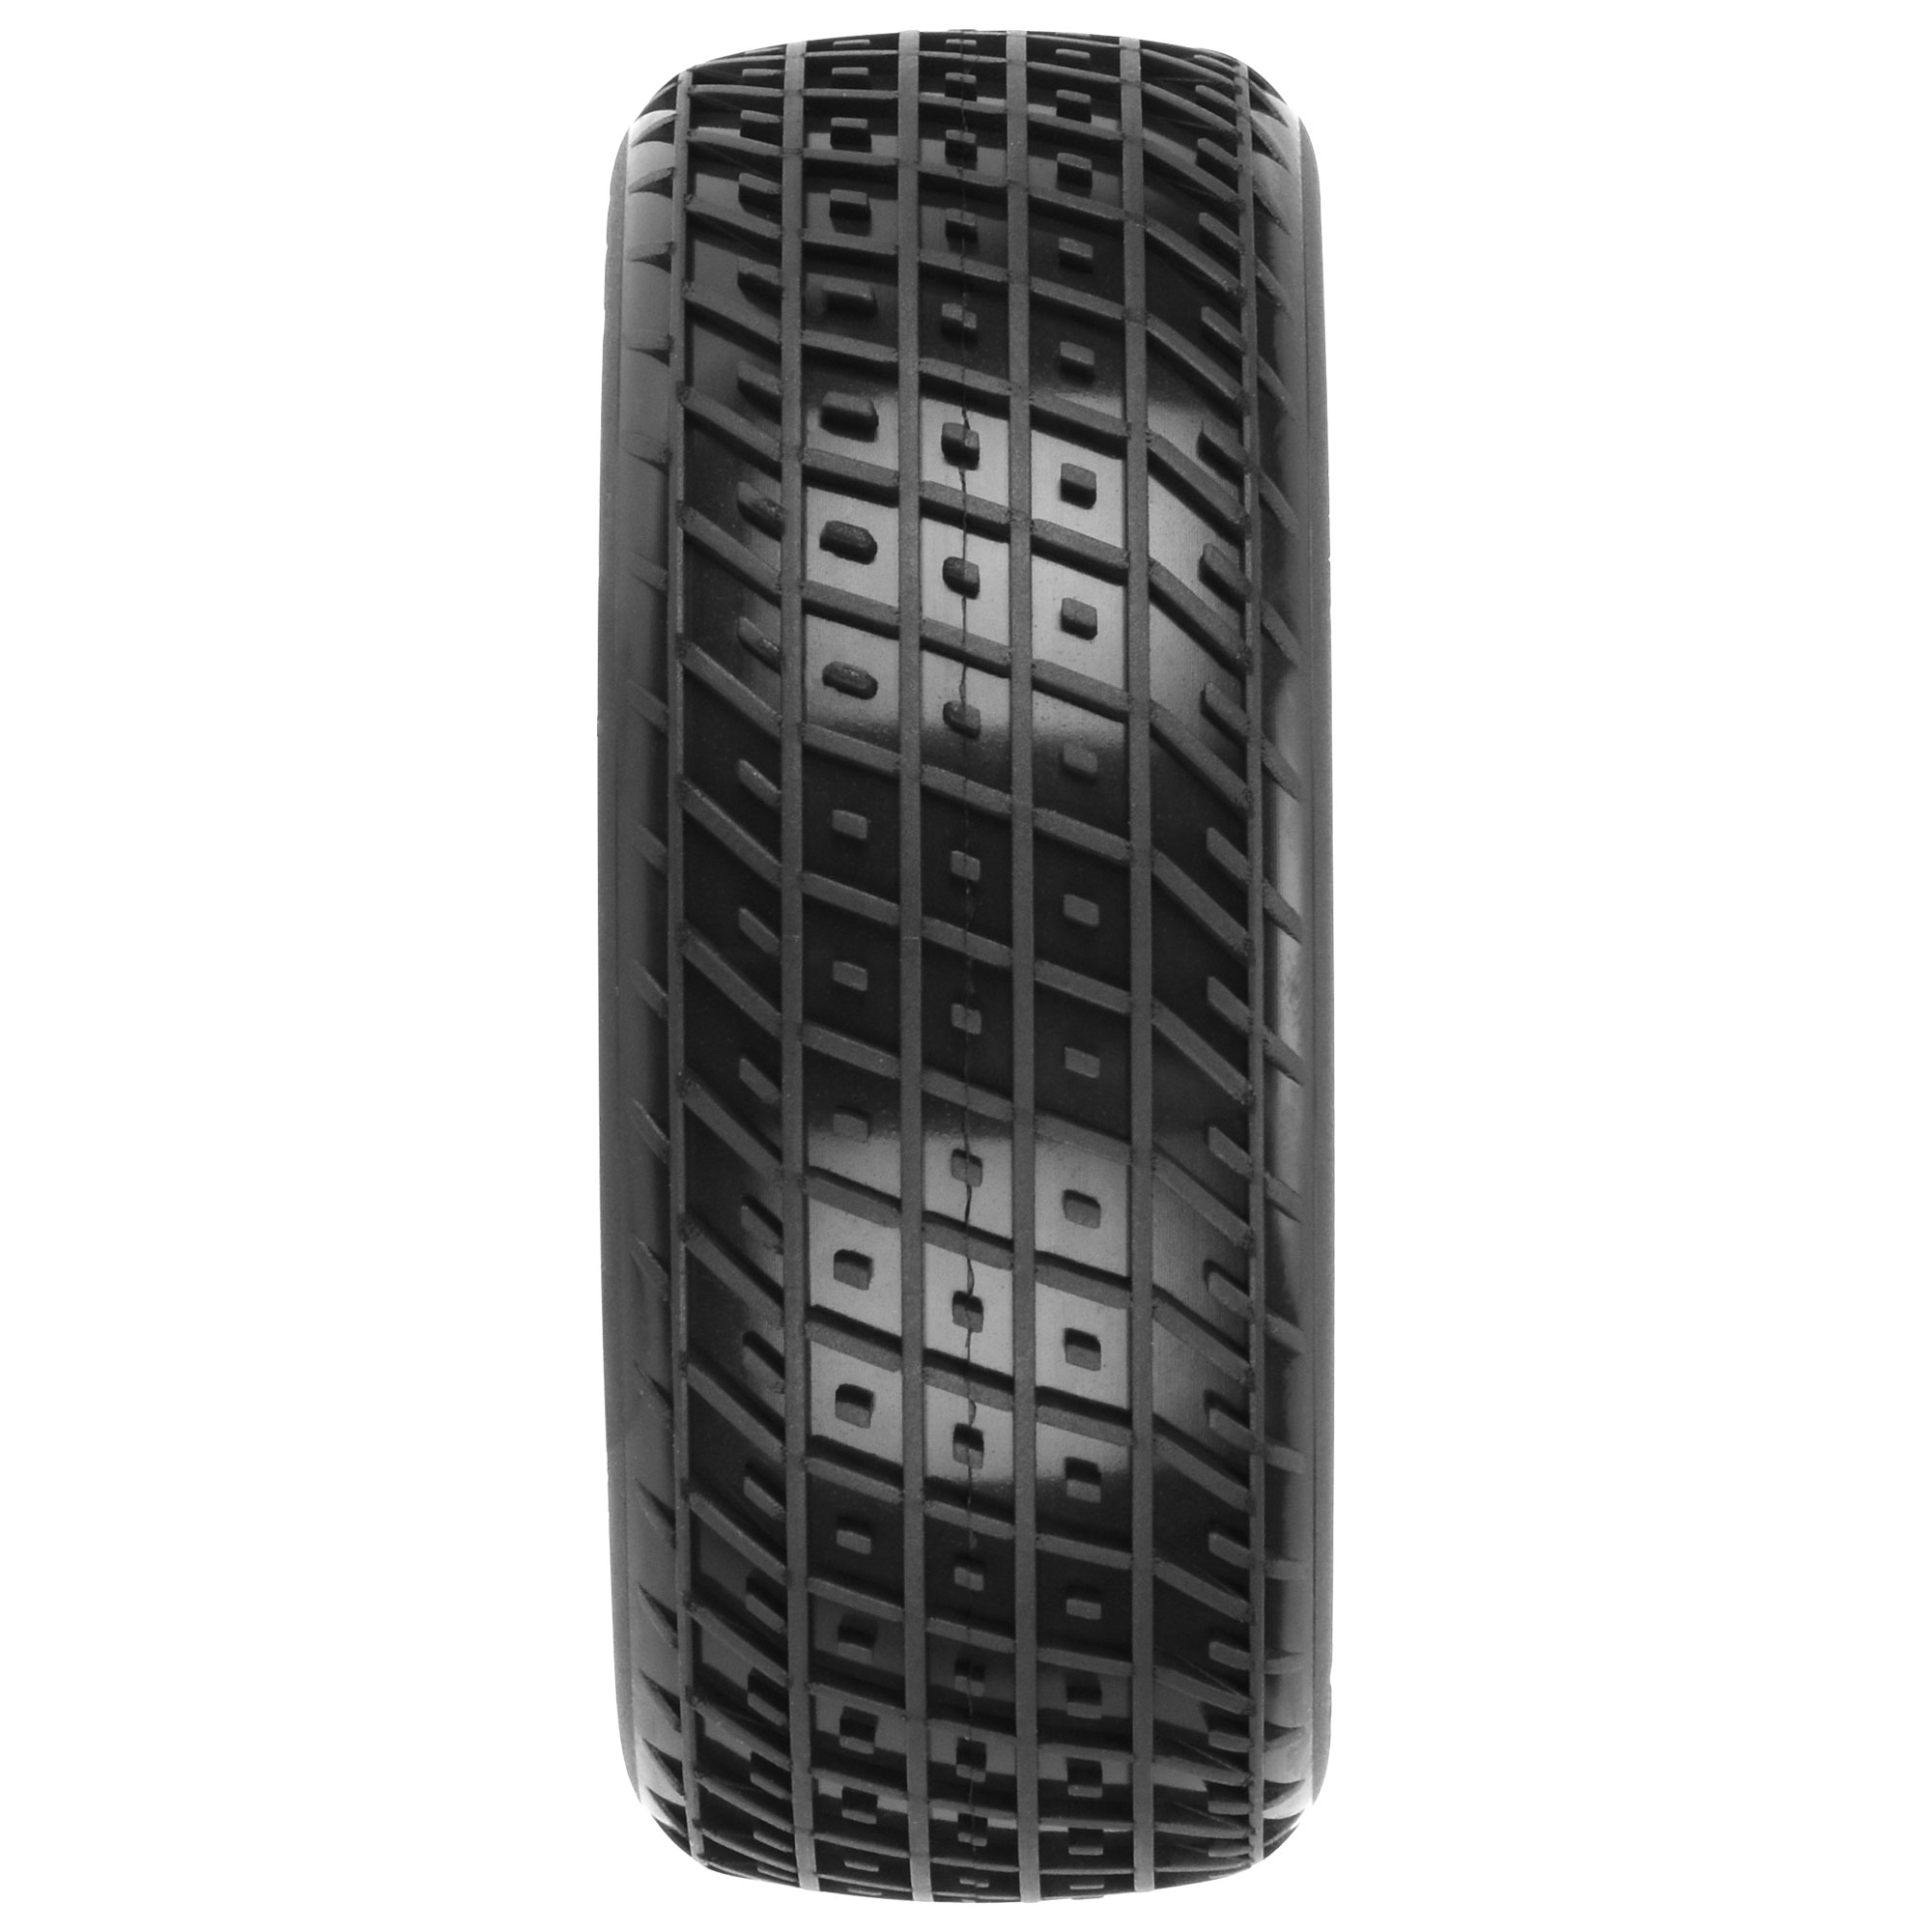 1/10 Array Clay 2WD/4WD Front 2.2" Dirt Oval Tires (2)